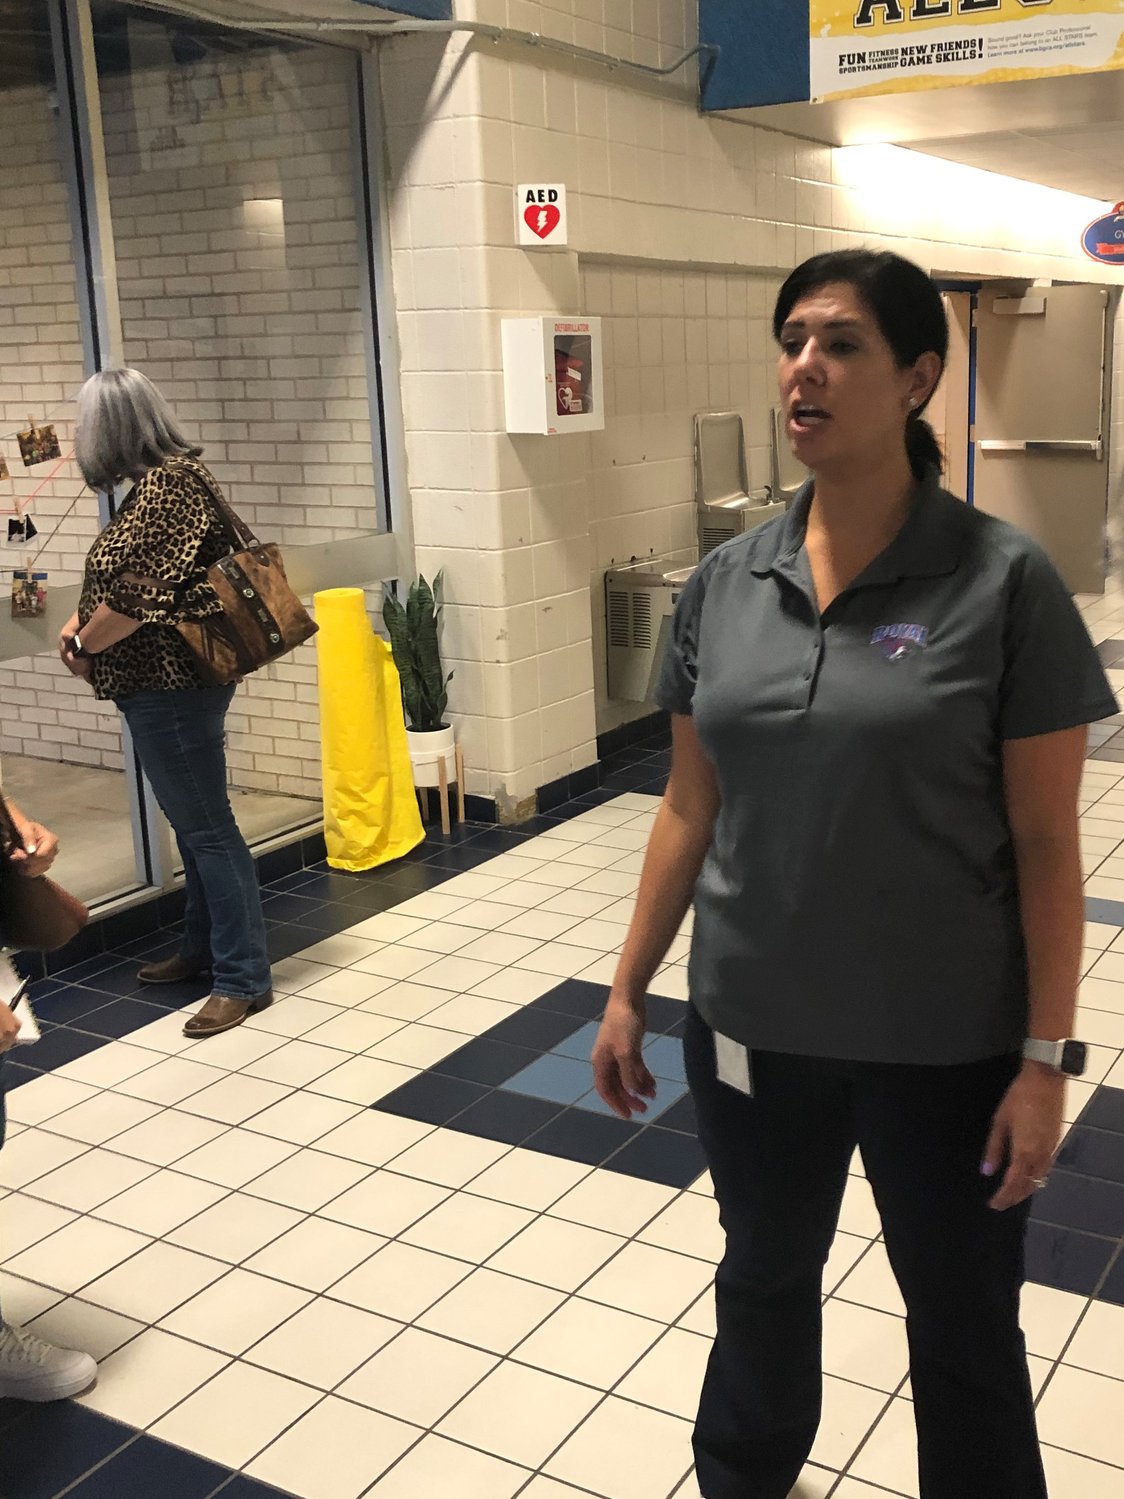 Royal STEM Academy principal Kaetlyn Miksch said her campus needed a fire sprinkler system similar to ones at the other four campuses. The campus does not presently have such a system. She said replacing the doors at the school’s main entrance is also a necessity to control access.